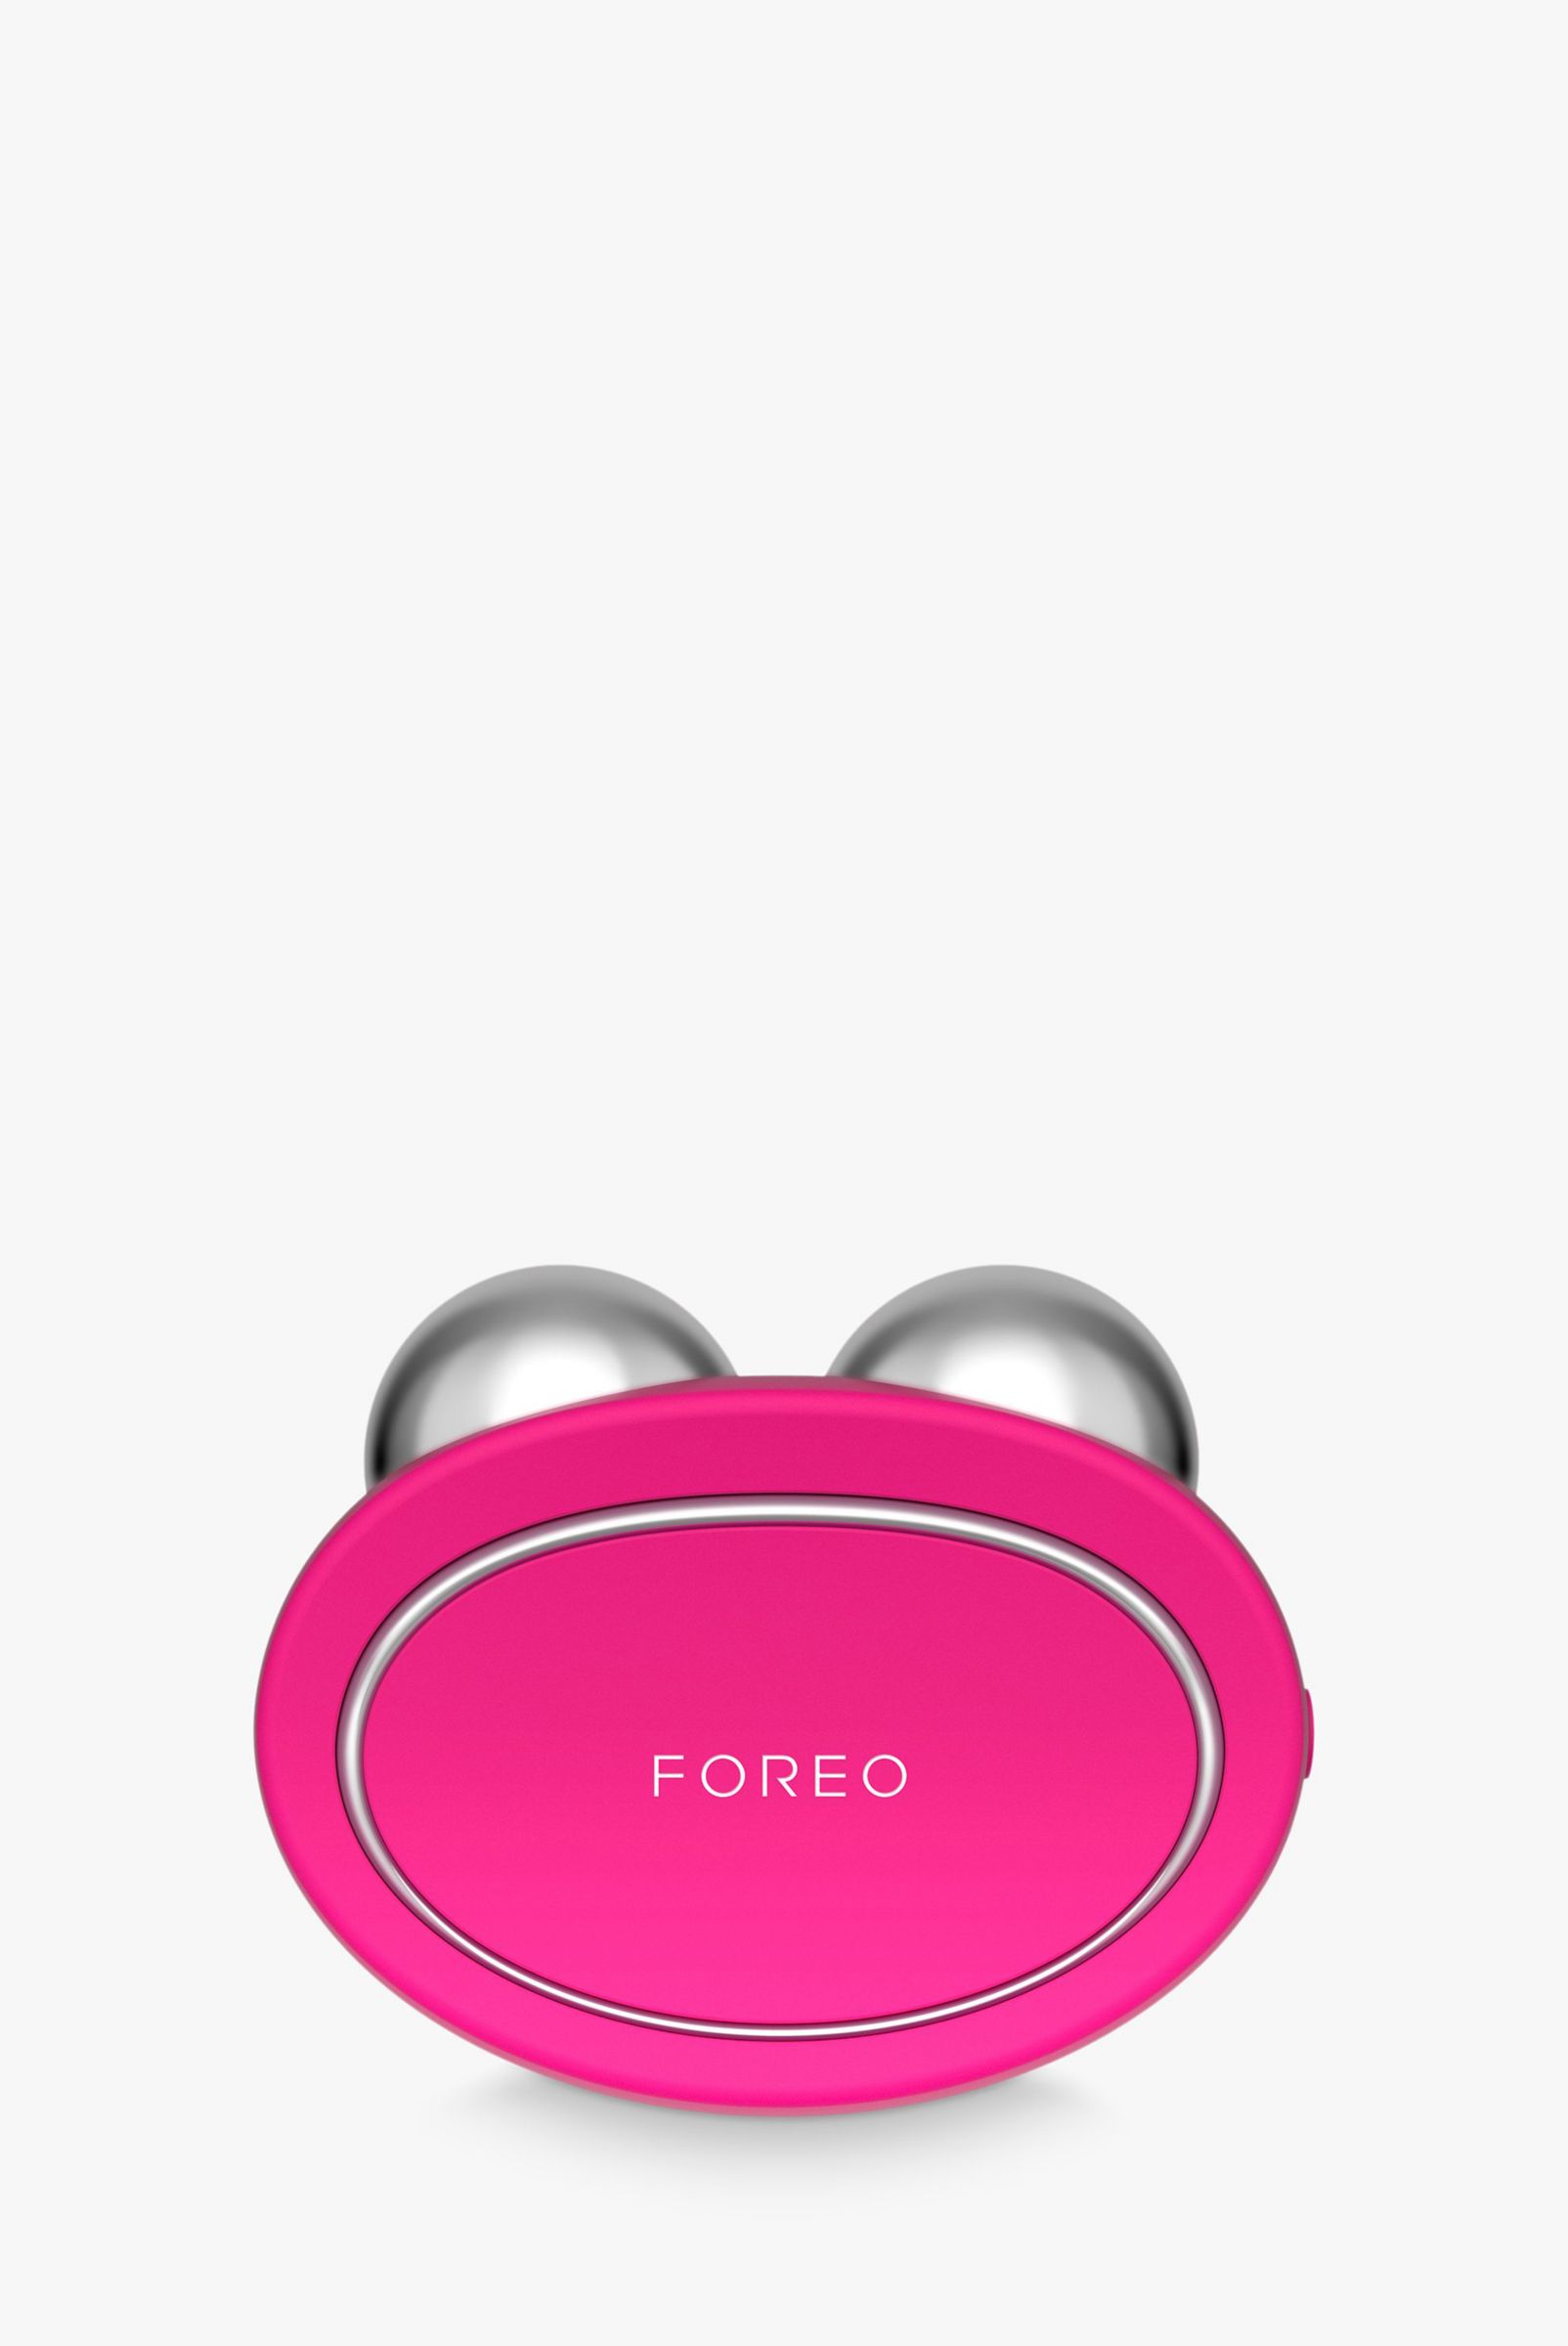 FOREO BEAR App-Connected Microcurrent Facial Device, Pink, £279.00 